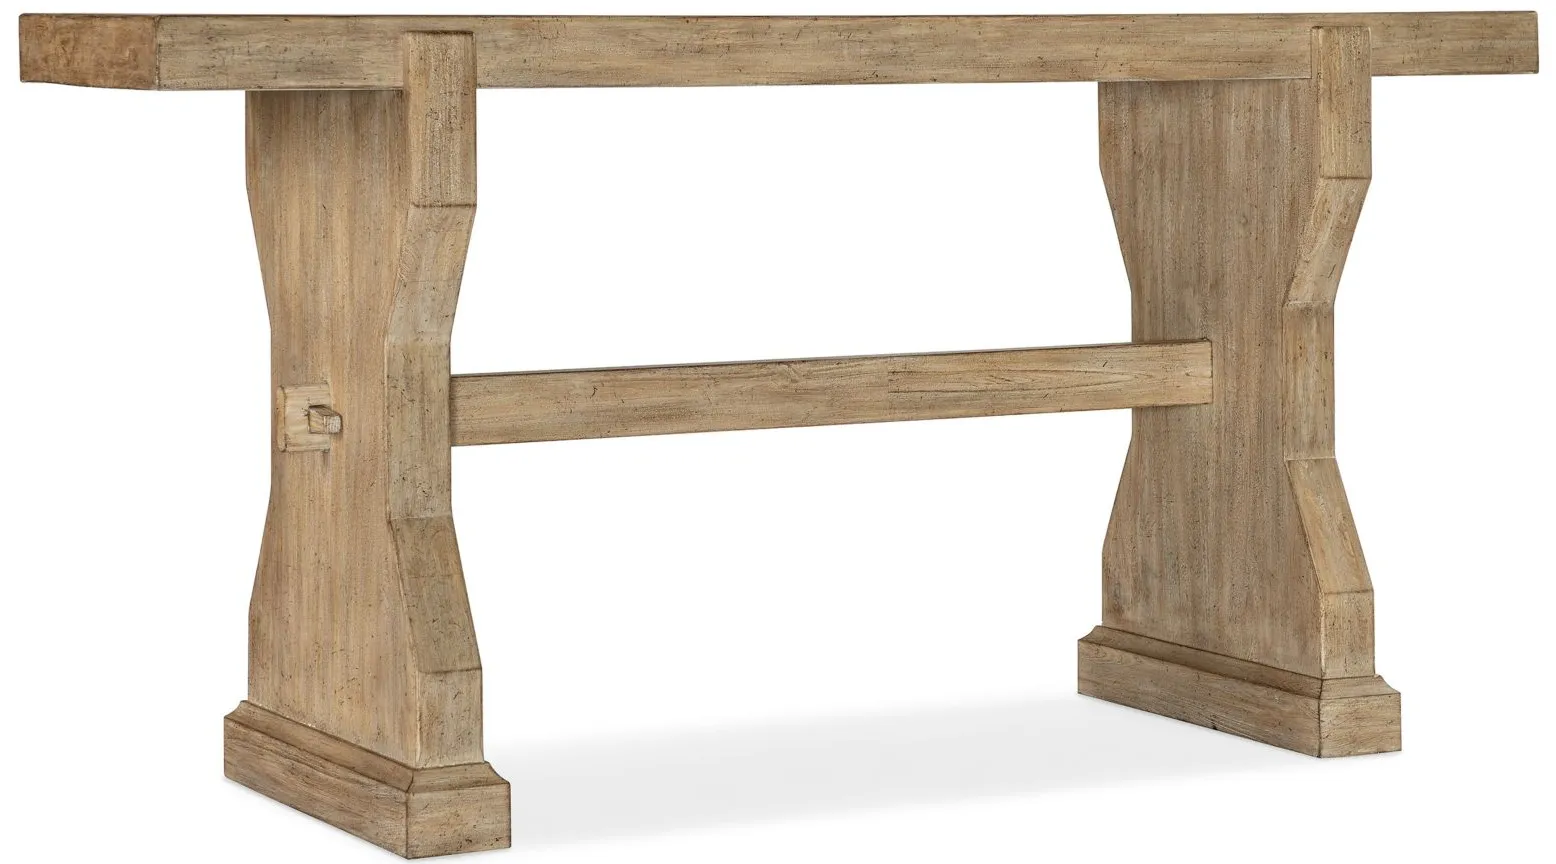 Commerce & Market Sofa Table in Light natural wood finish by Hooker Furniture